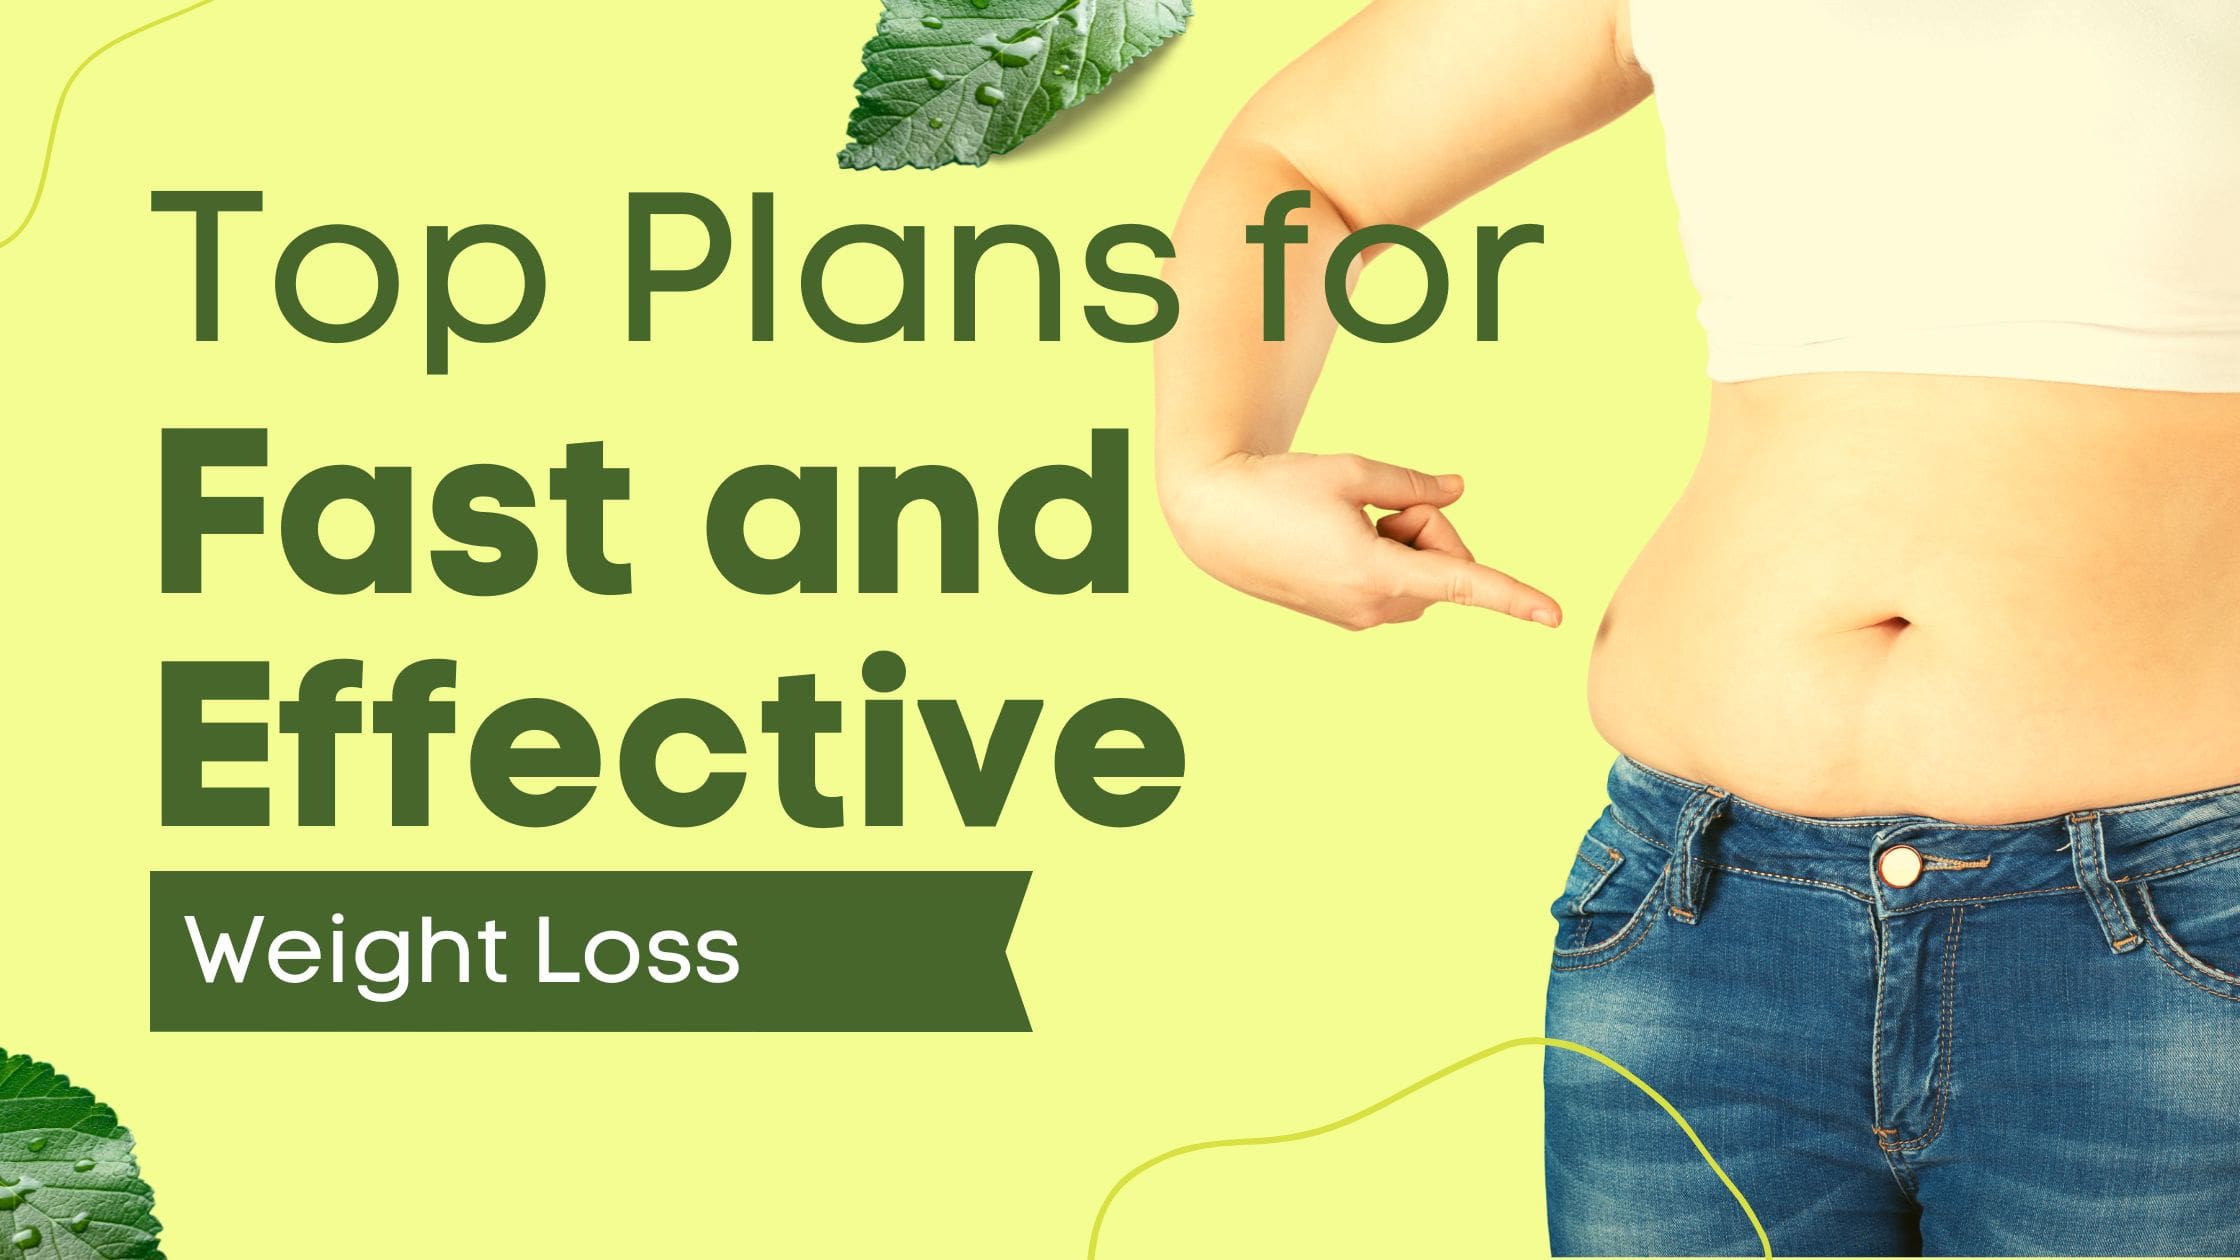 Top Plans for Fast and Effective Weight Loss - Woman Pointing to Belly